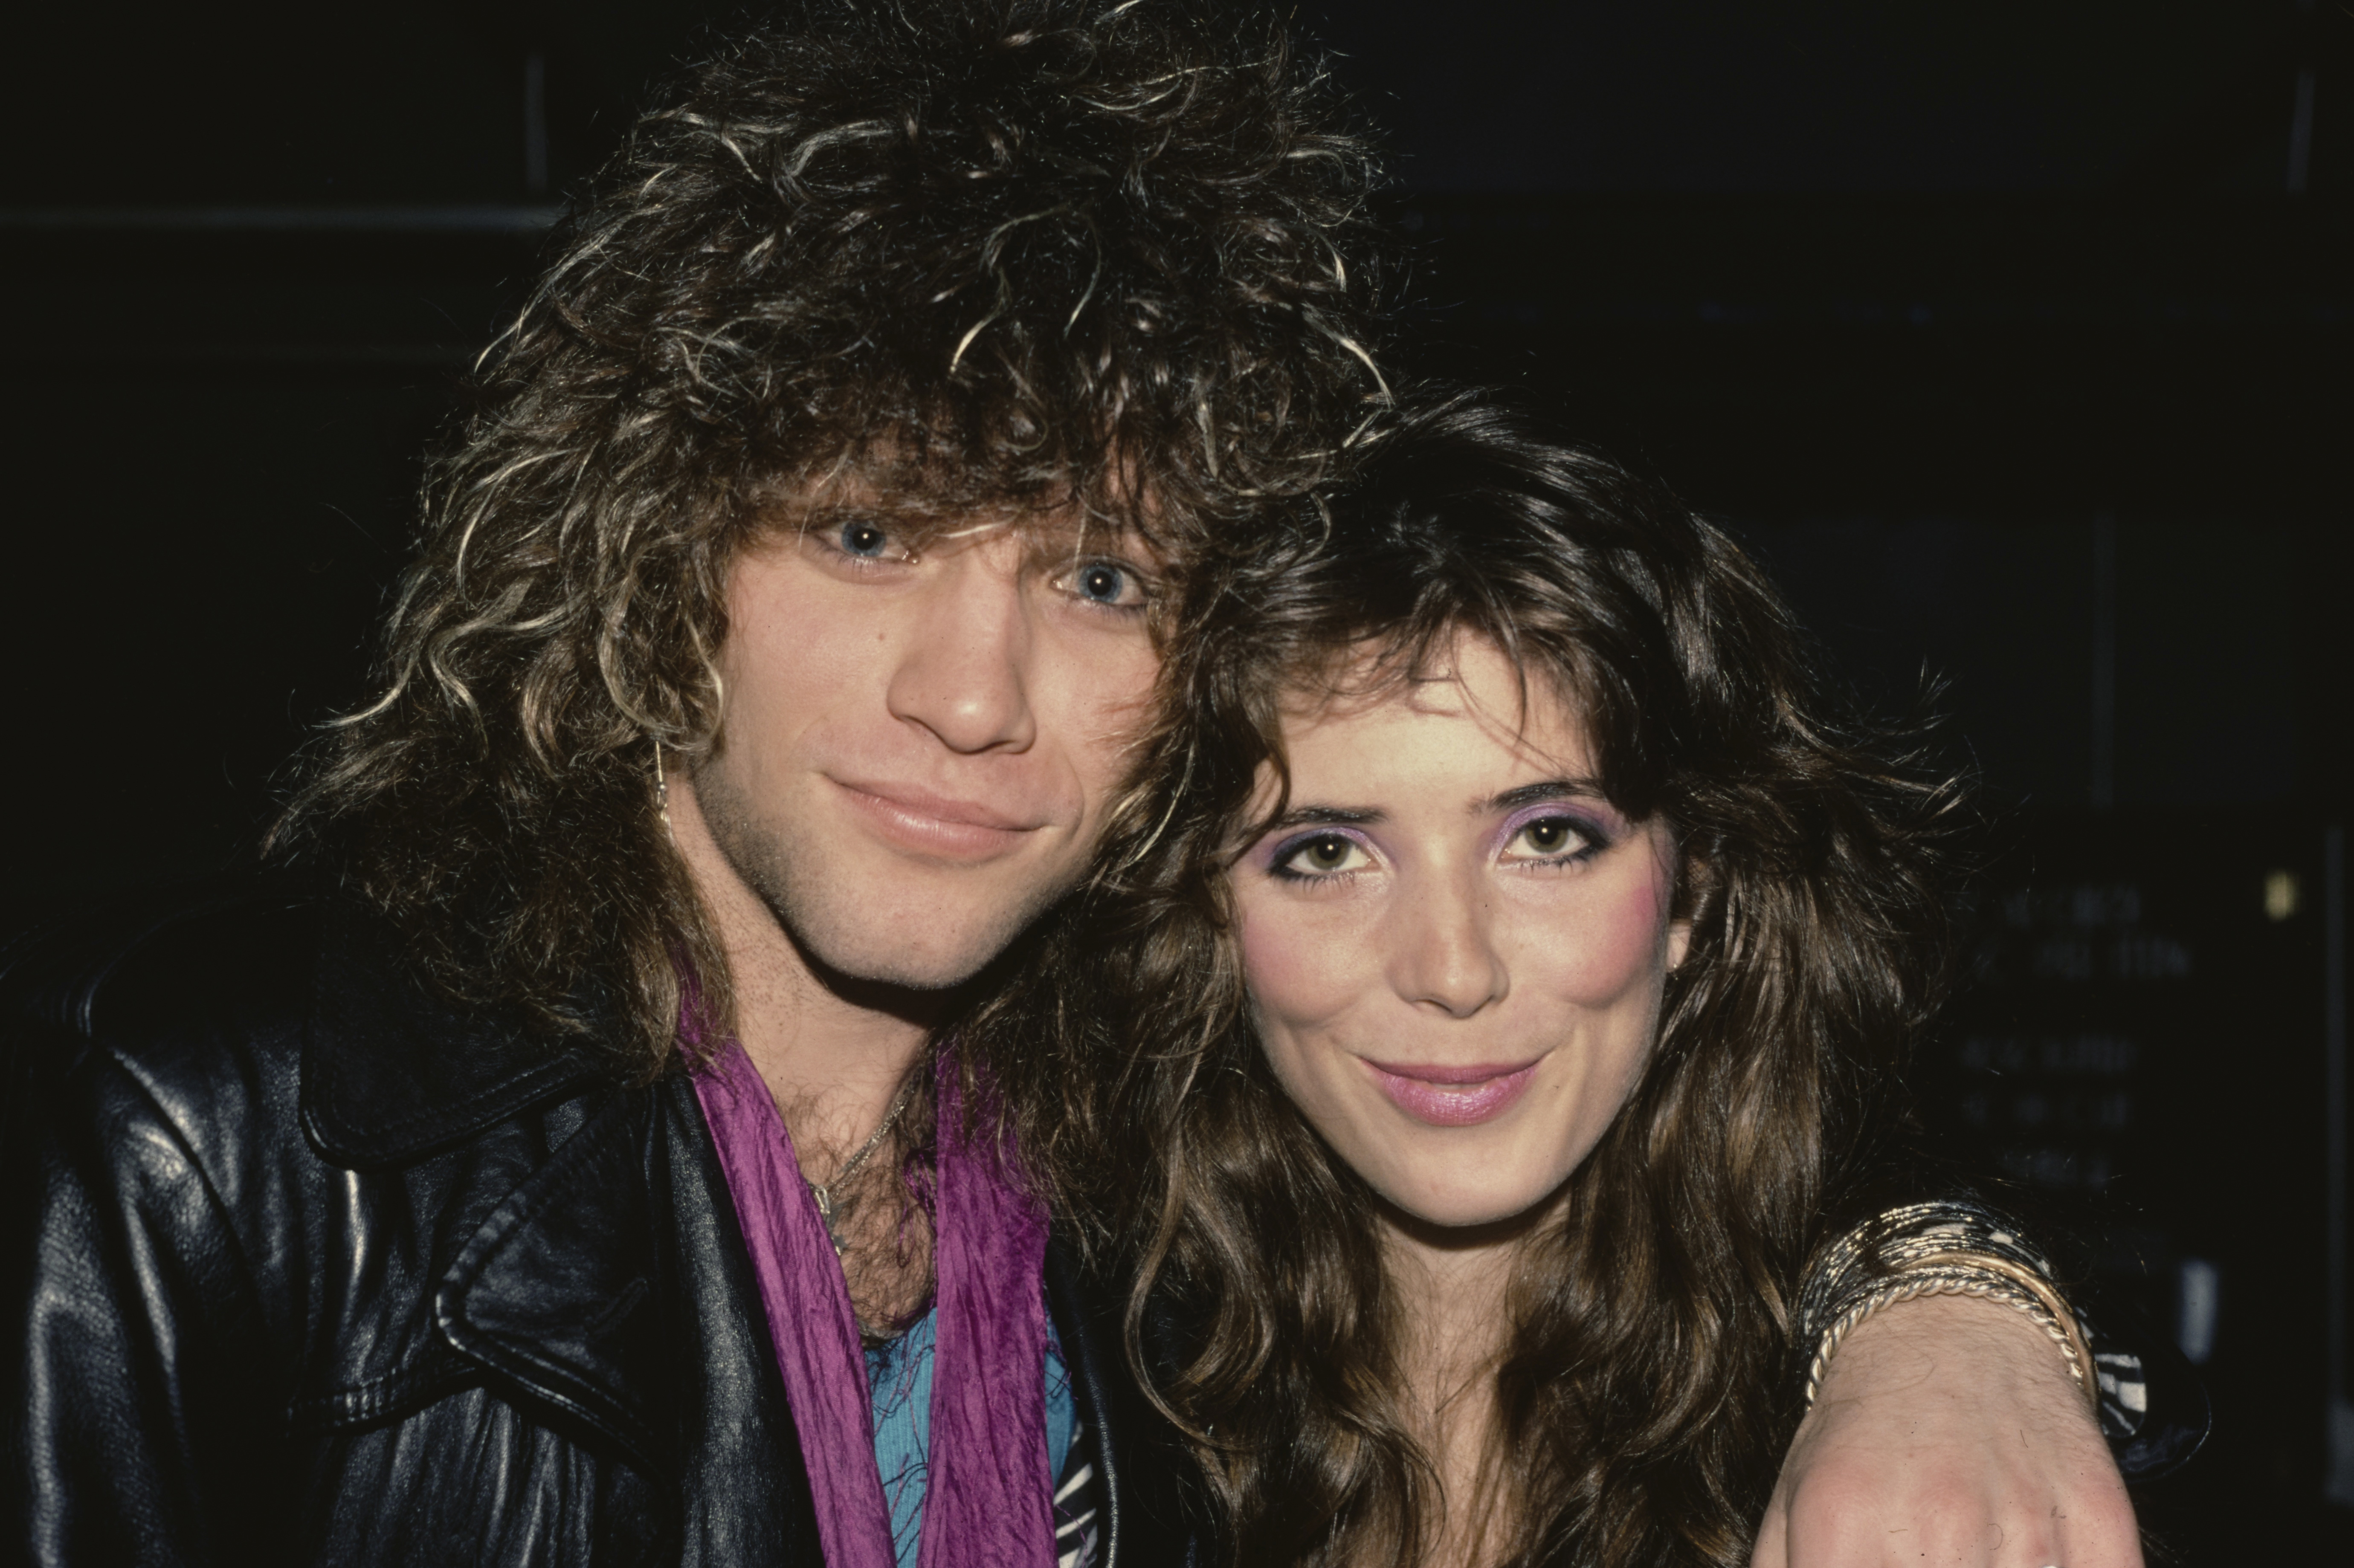 Jon Bon Jovi and Dorothea Hurley at the Rockers '85 awards ceremony at the Sheraton Premiere Hotel in Los Angeles, California, March 1985. | Source: Getty Images